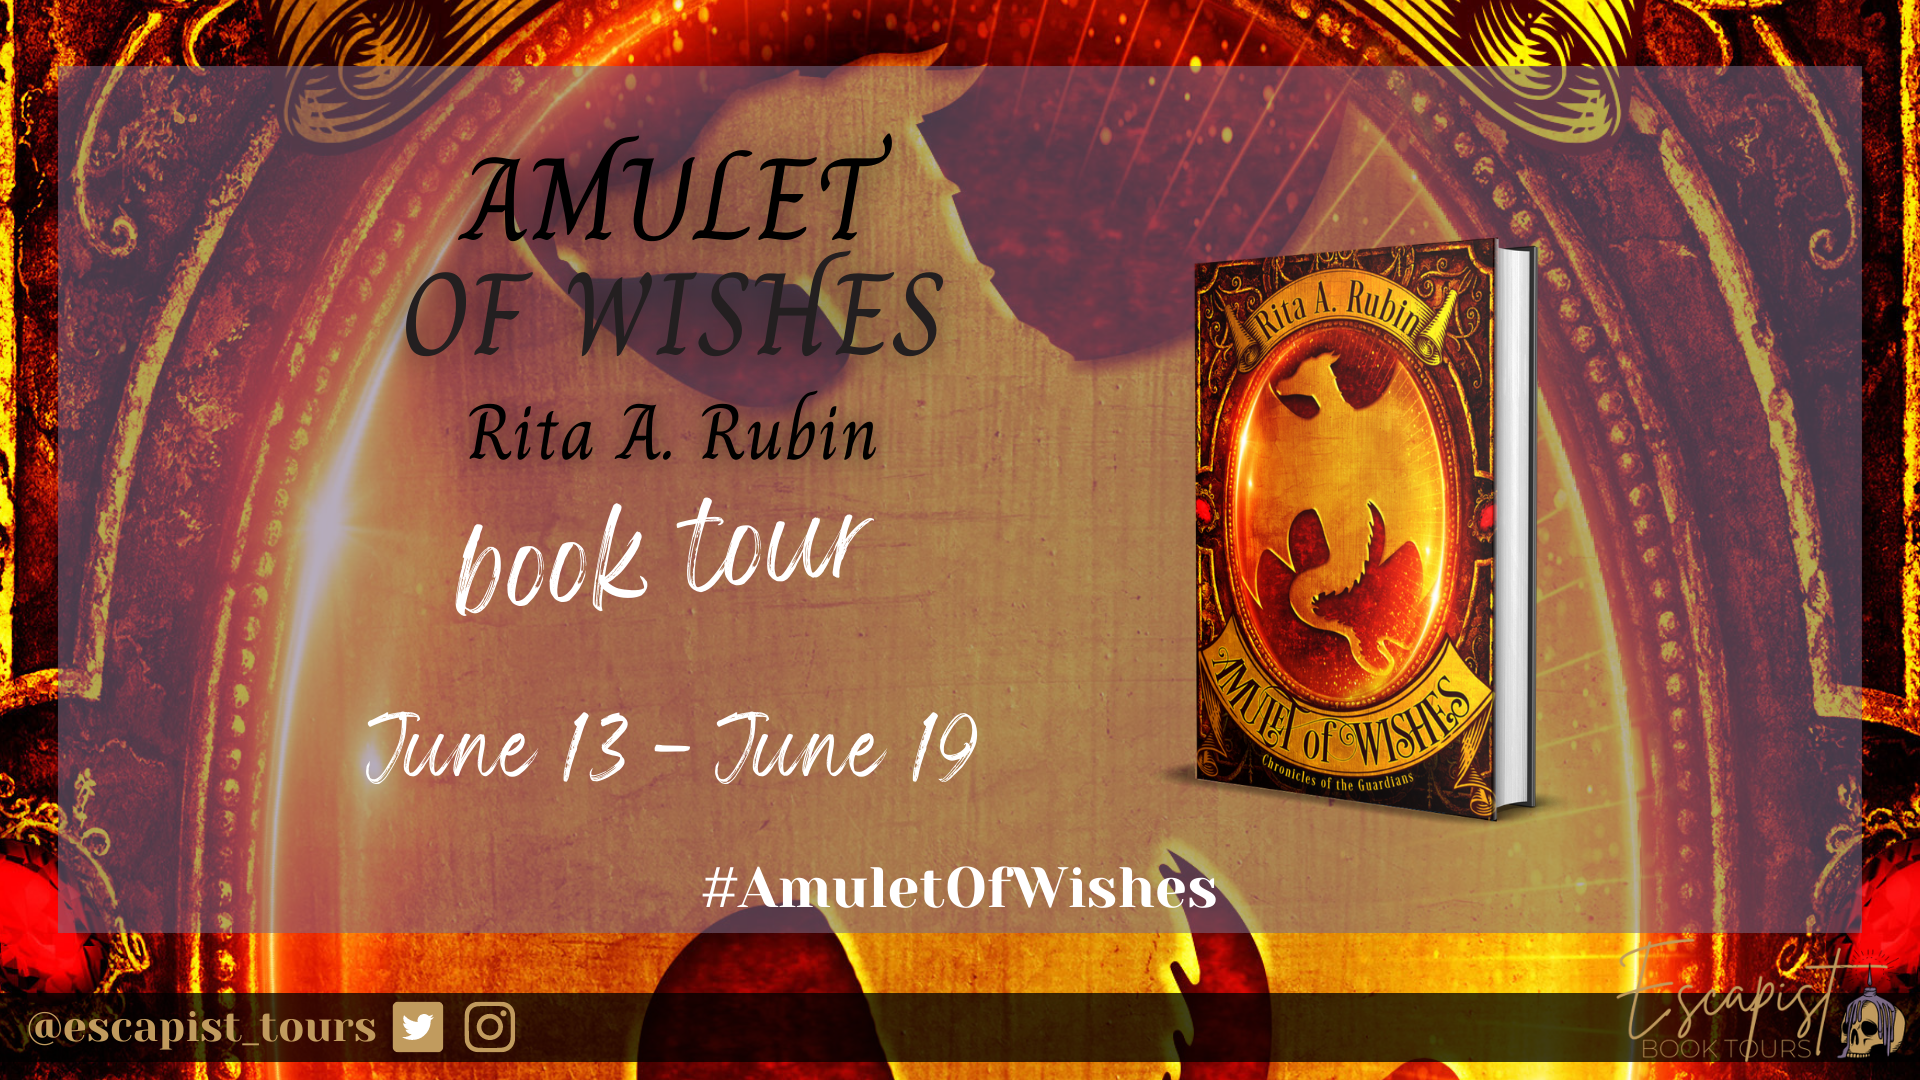 Amulet of Wishes blog announcement